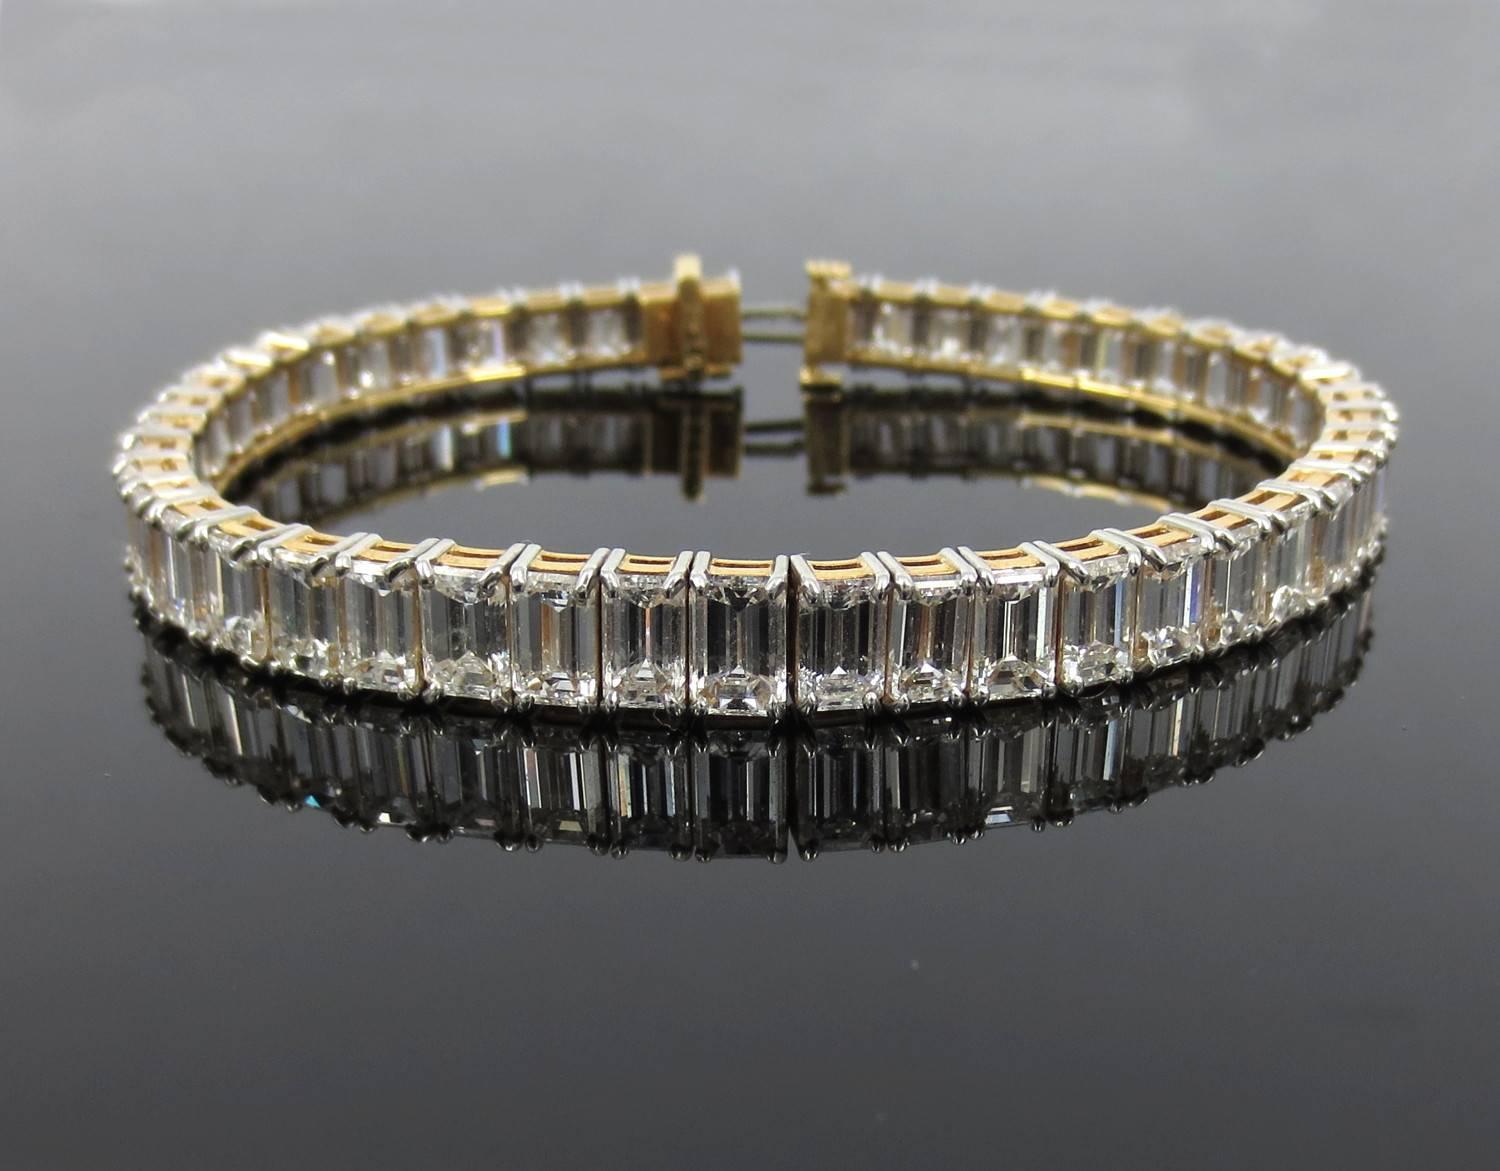 Tiffany & Co. platinum/18k emerald cut diamond straight line bracelet. Contains 47 diamonds weighing approx. 28cts total. Total weight of bracelet 25 grams.